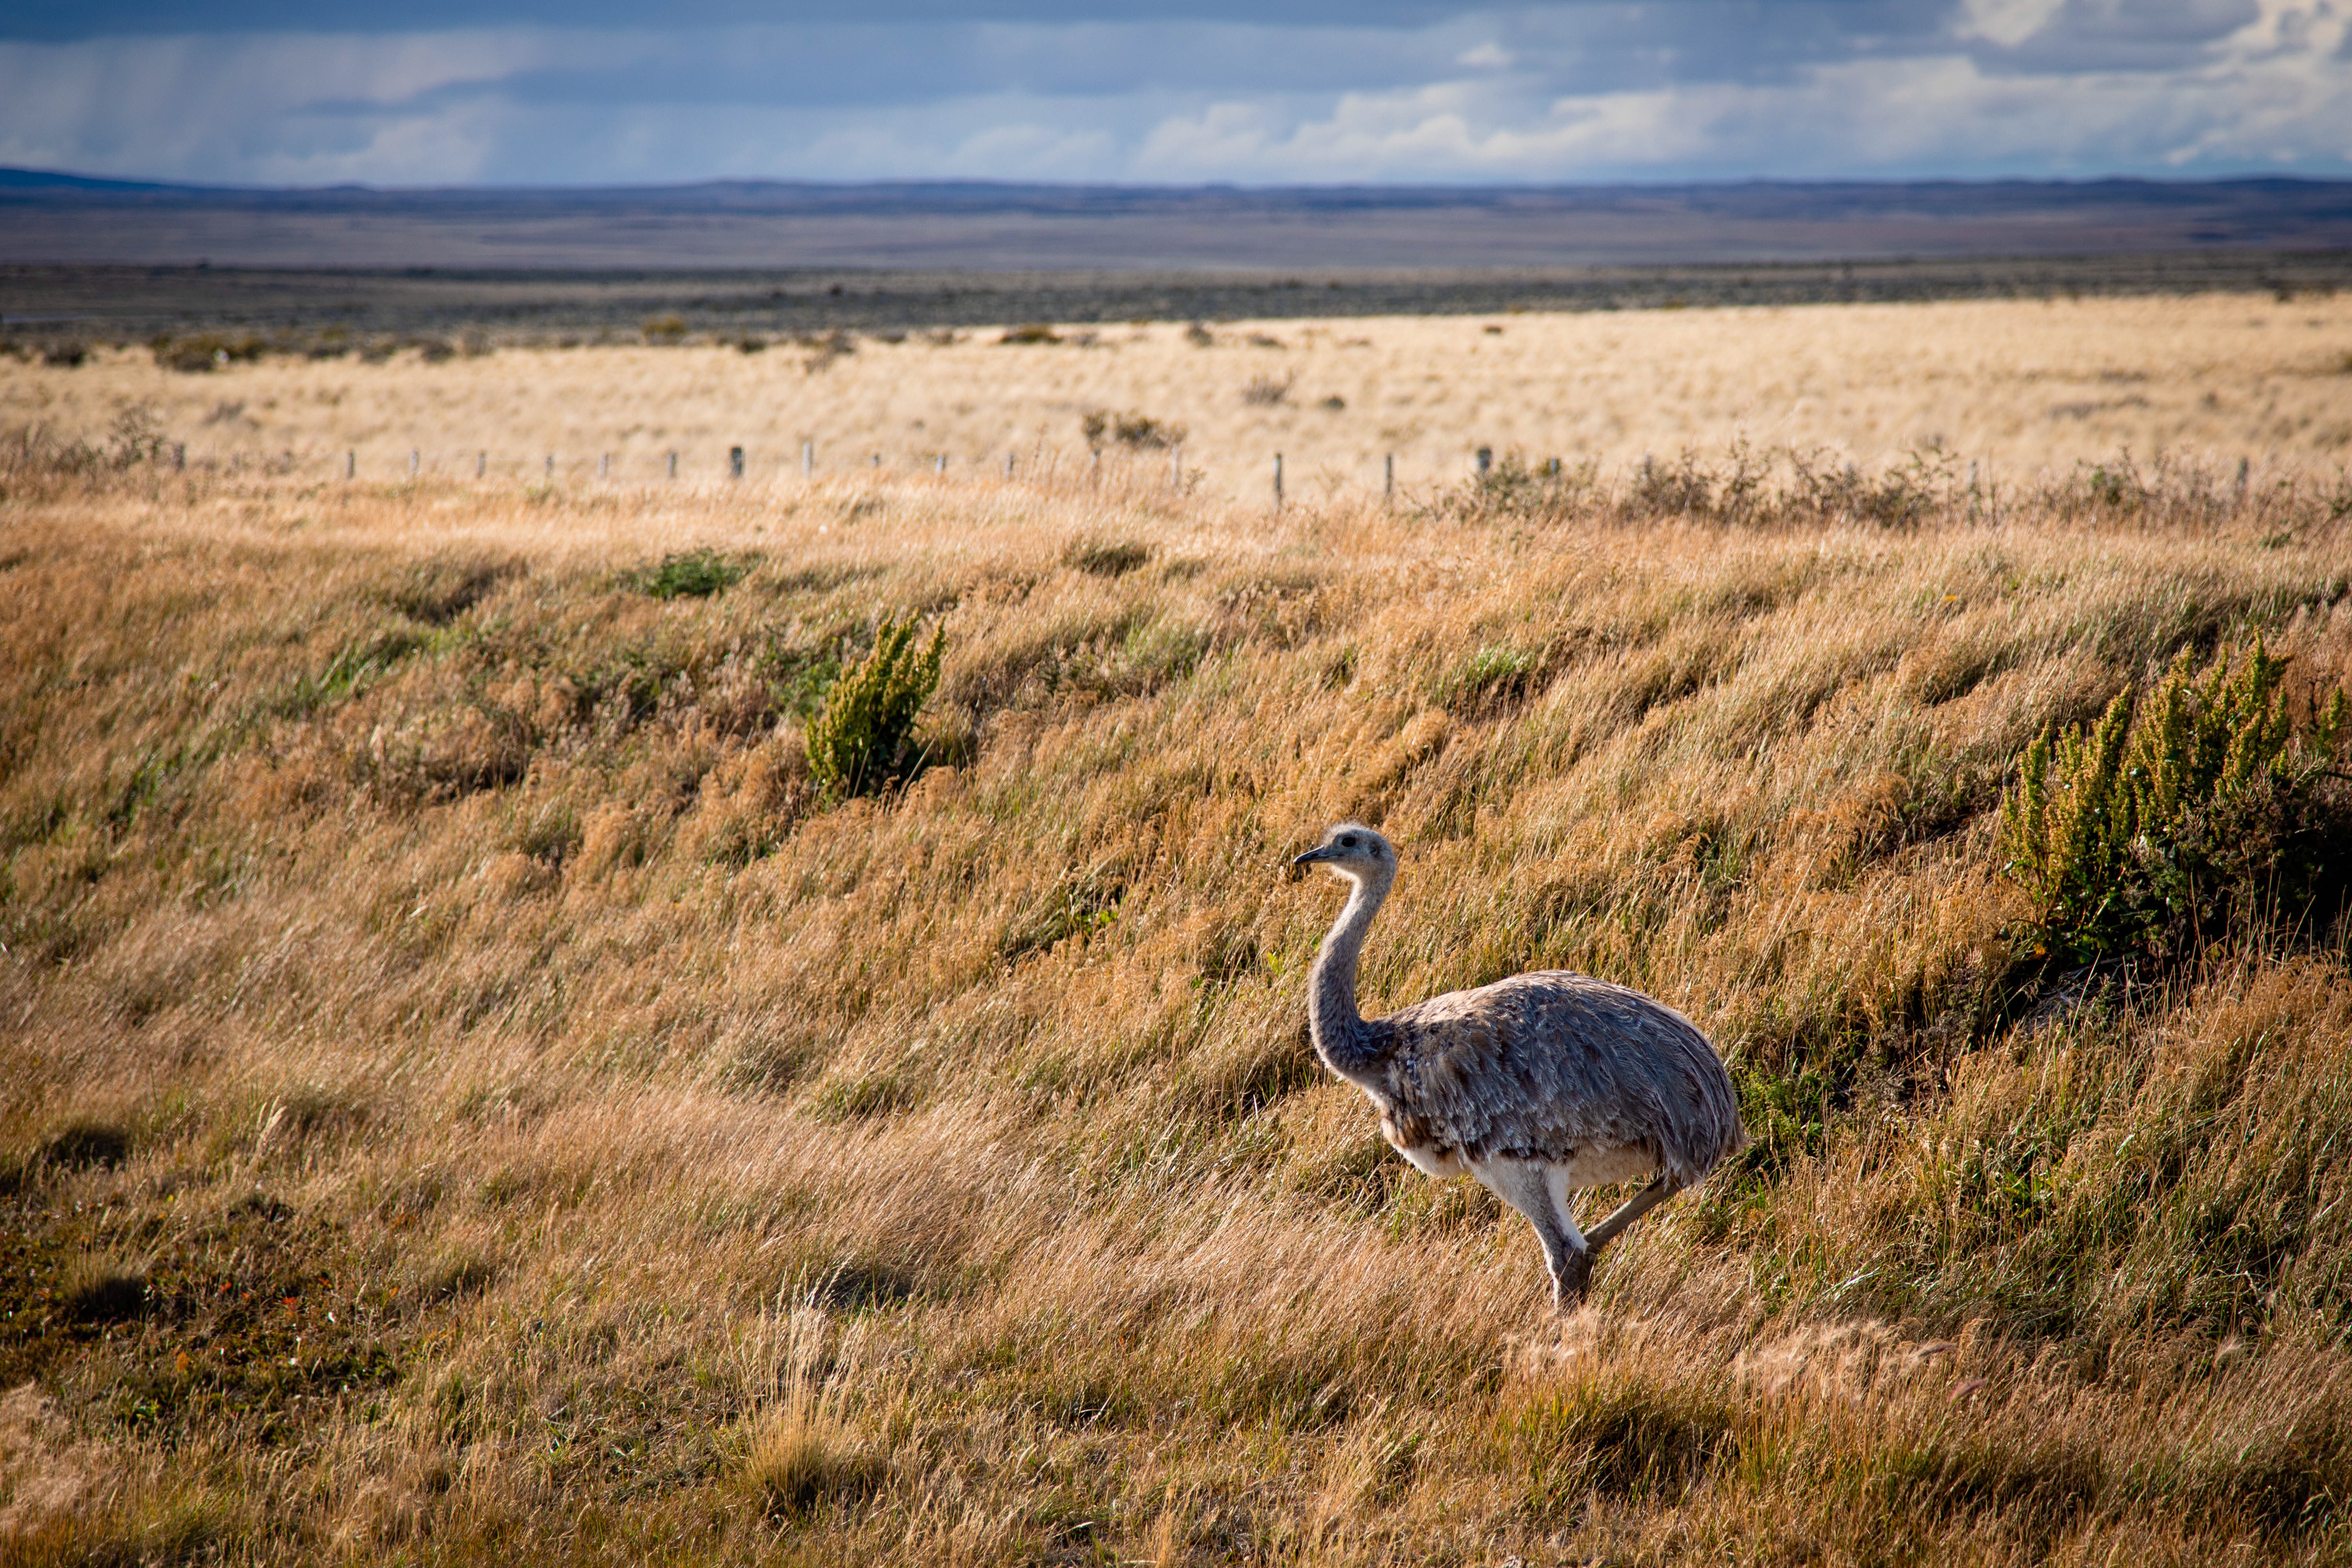 Rheas on the side of the road near Punta Arenas